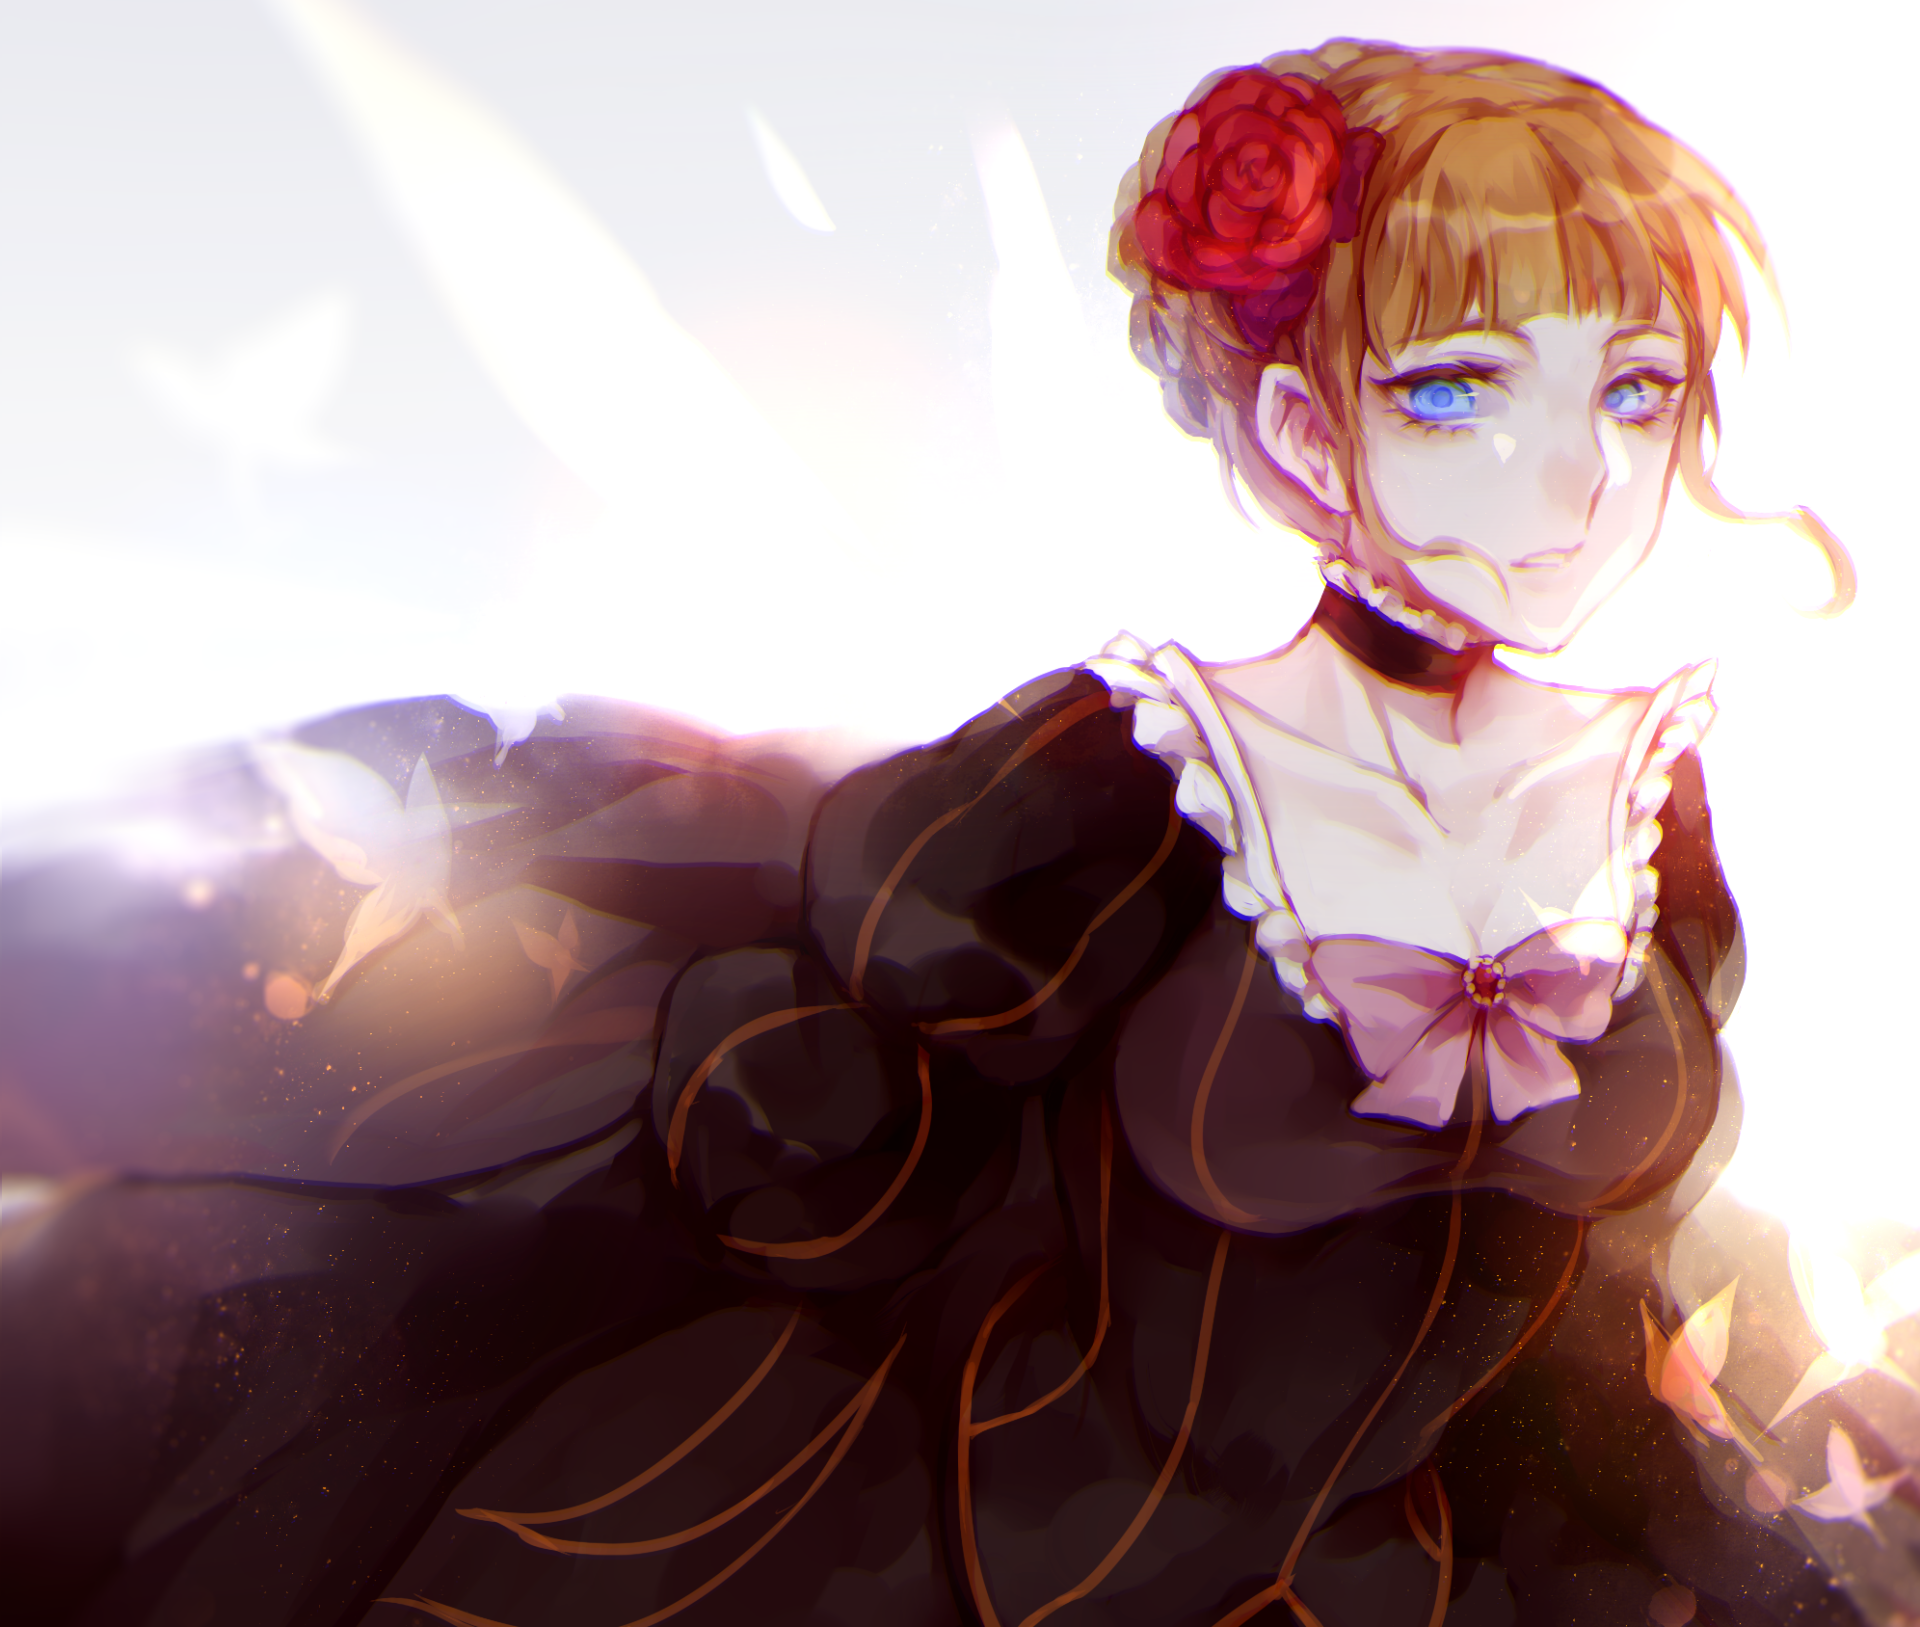 umineko when they cry vn updated